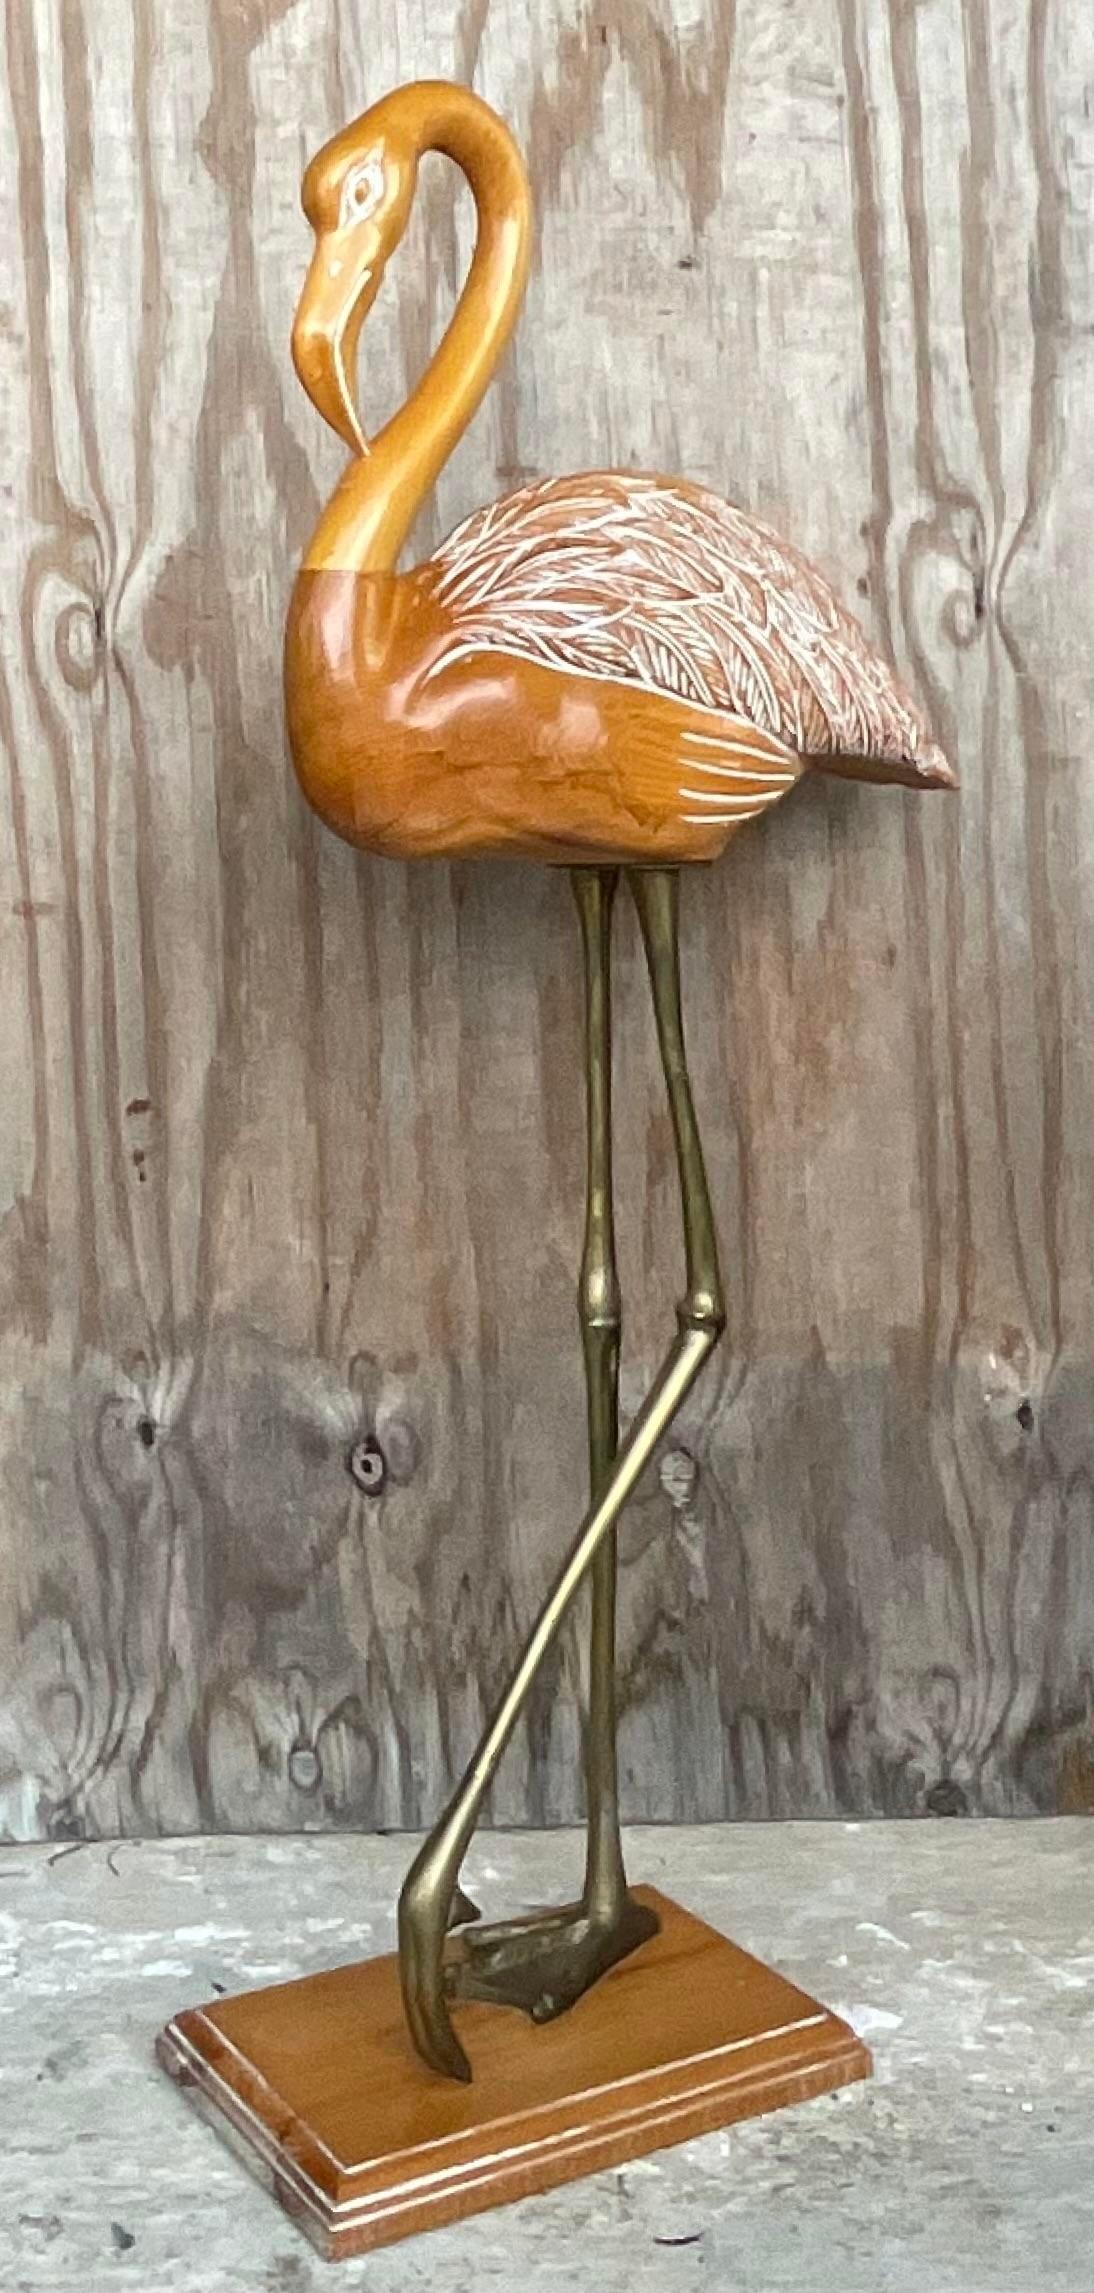 A stunning vintage Coastal monumental flamingo. A chic hand carved bird with a light wash finish. Stands in sold brass legs. Acquired from a Palm Beach estate.